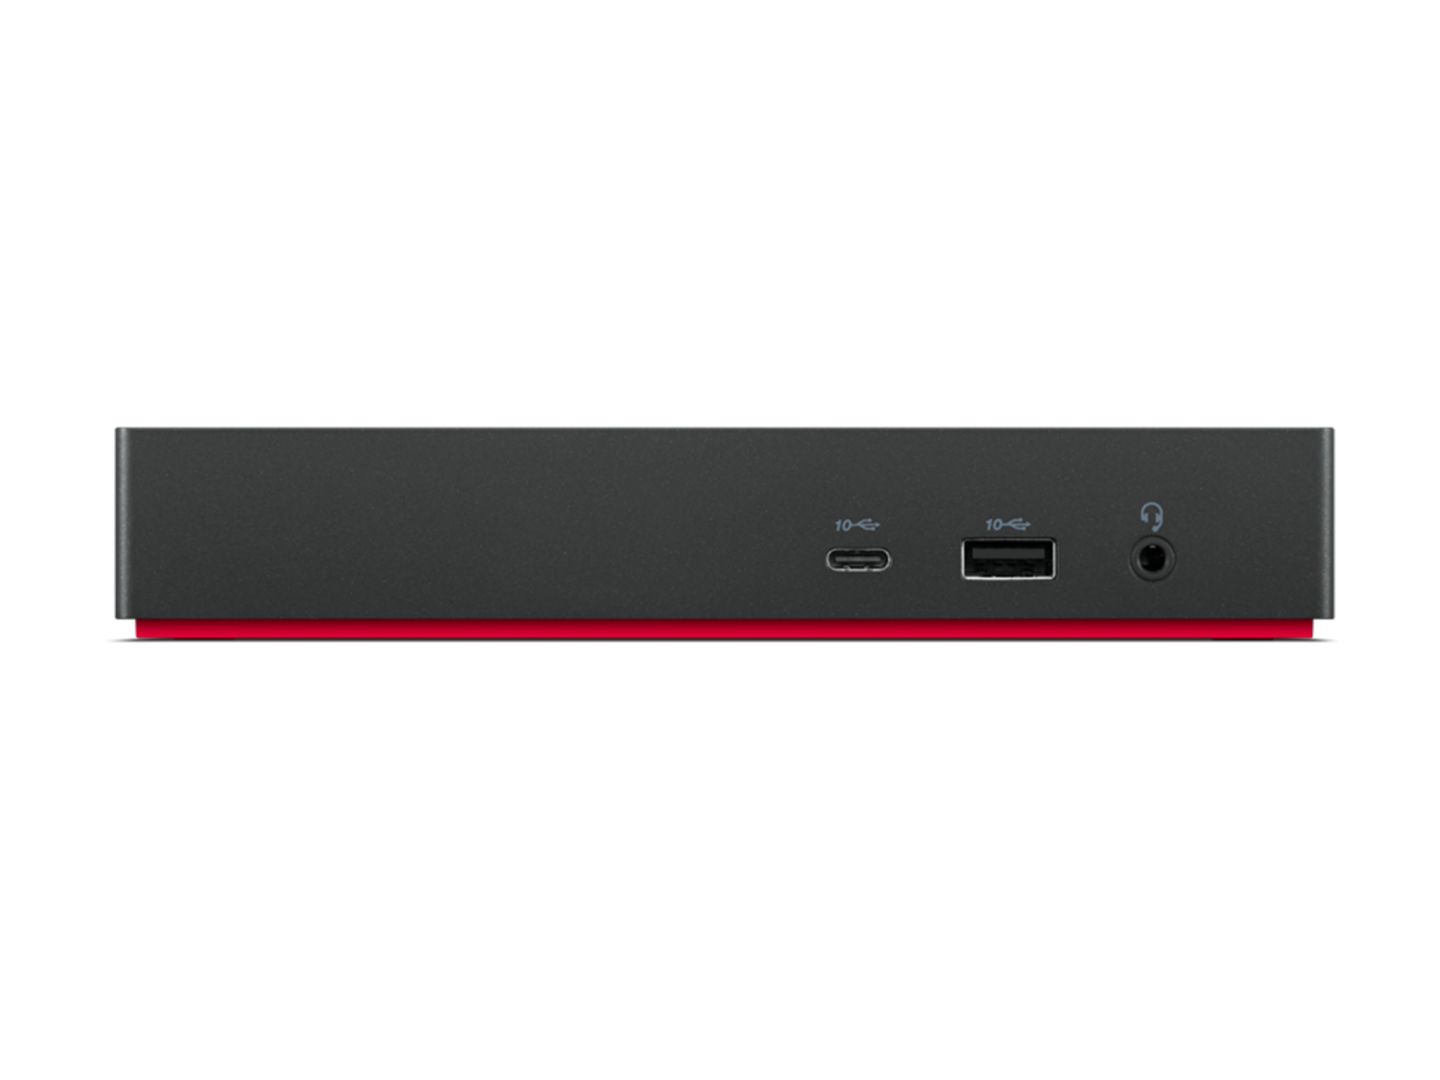 Lenovo USB-C Dock (Windows Only), Video Ports: 2 x Display Port,1 x HDMI Port, Output Power: 65W with 90W power adapter connected_2